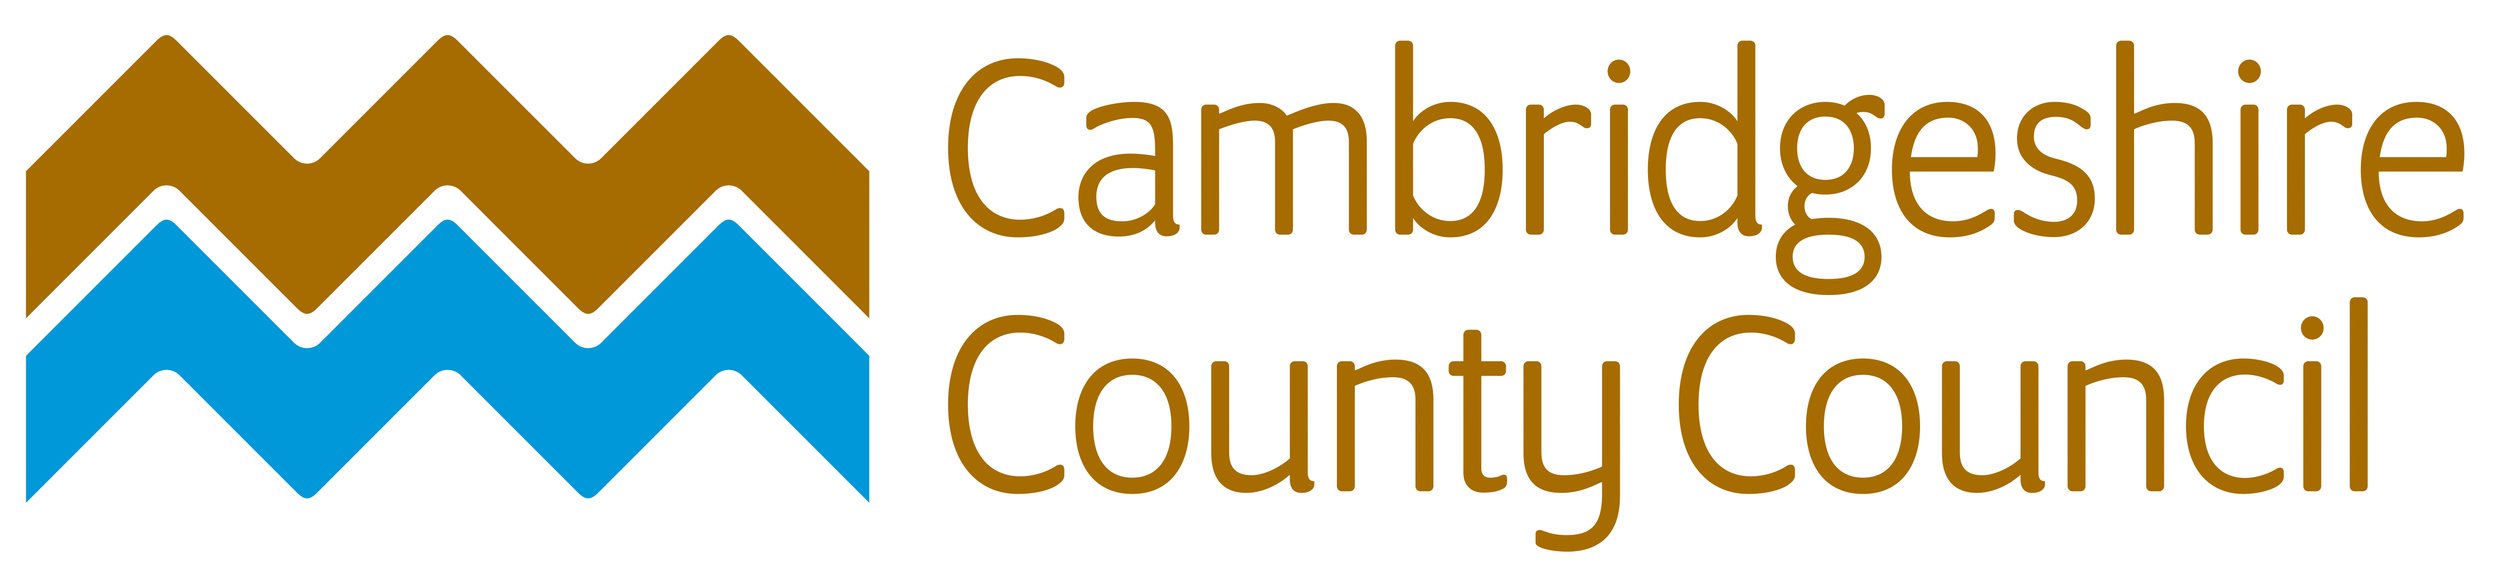 Cambs County Council.jpg